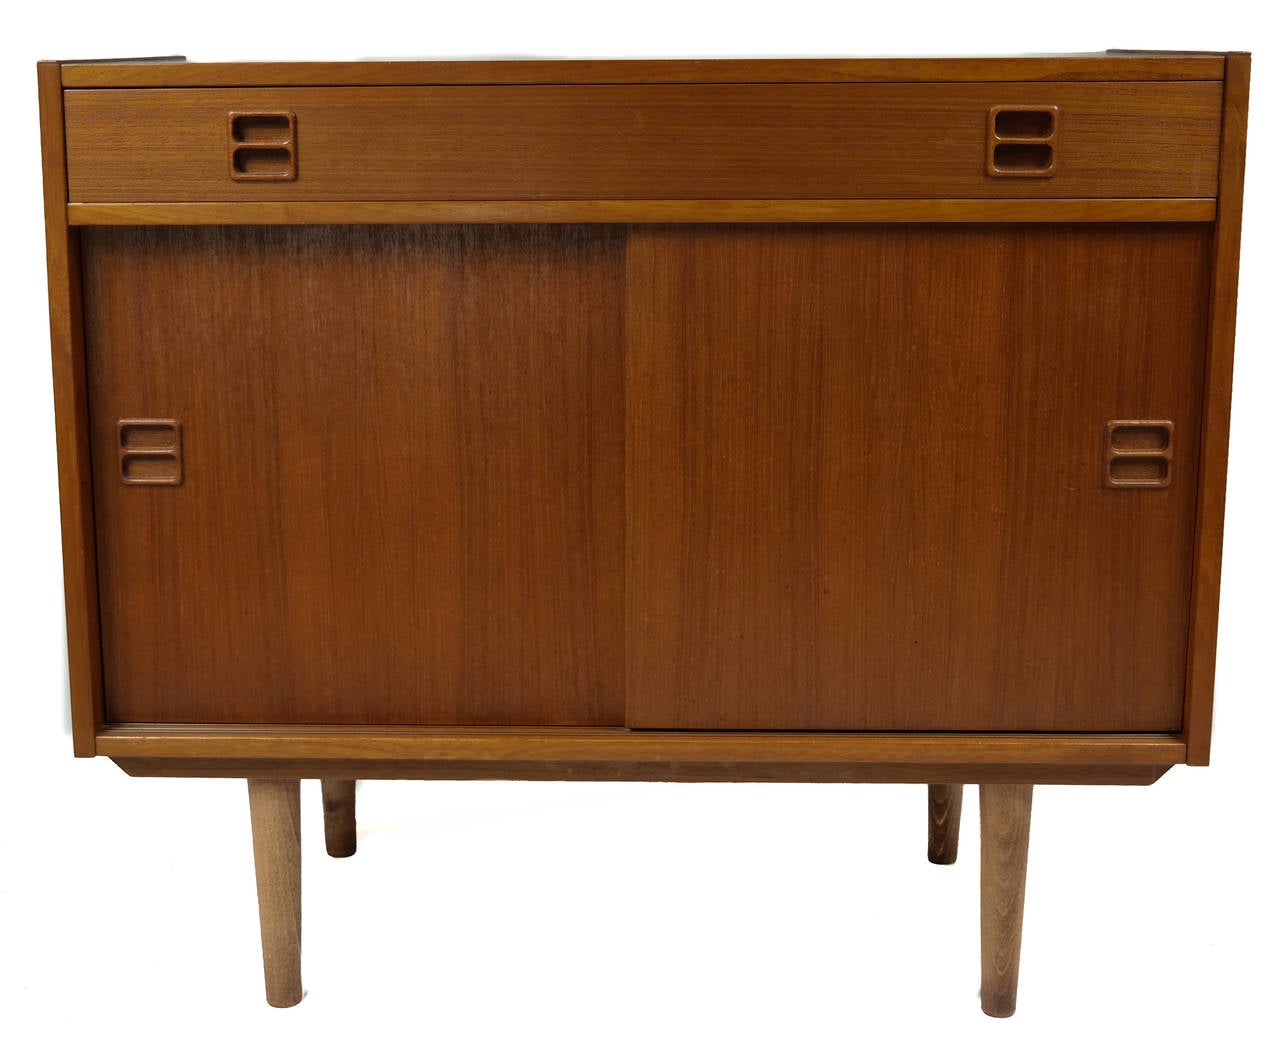 Danish Mid-Century Modern teak wood server, circa 1950s. Features a single drawer over two sliding doors, rising on turned tapered legs.